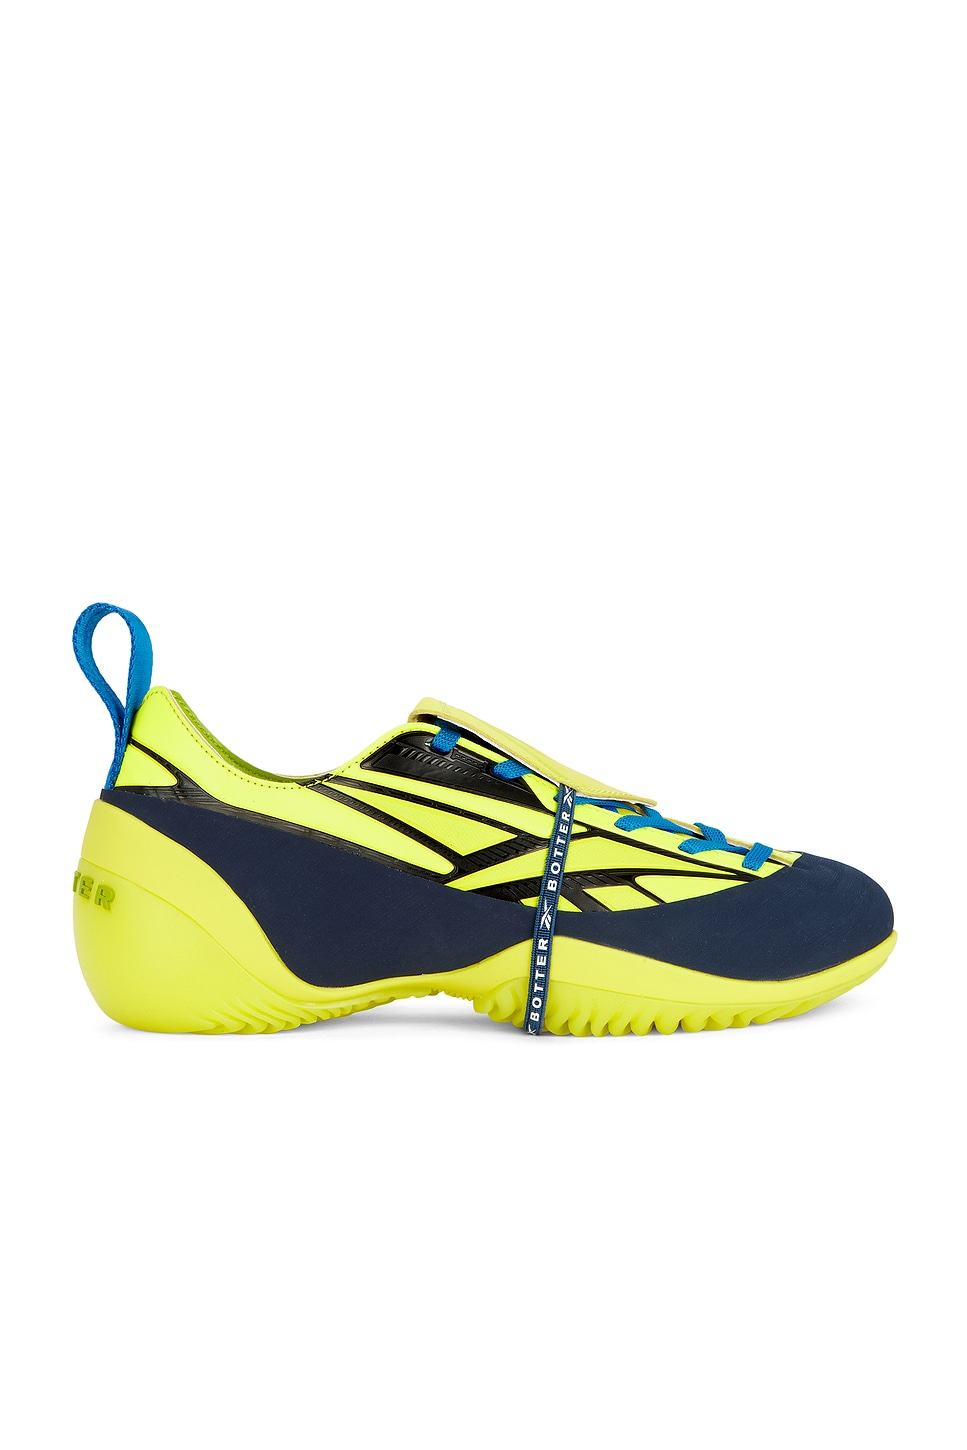 Image 1 of BOTTER x Reebok Sneakers in Yellow & Blue